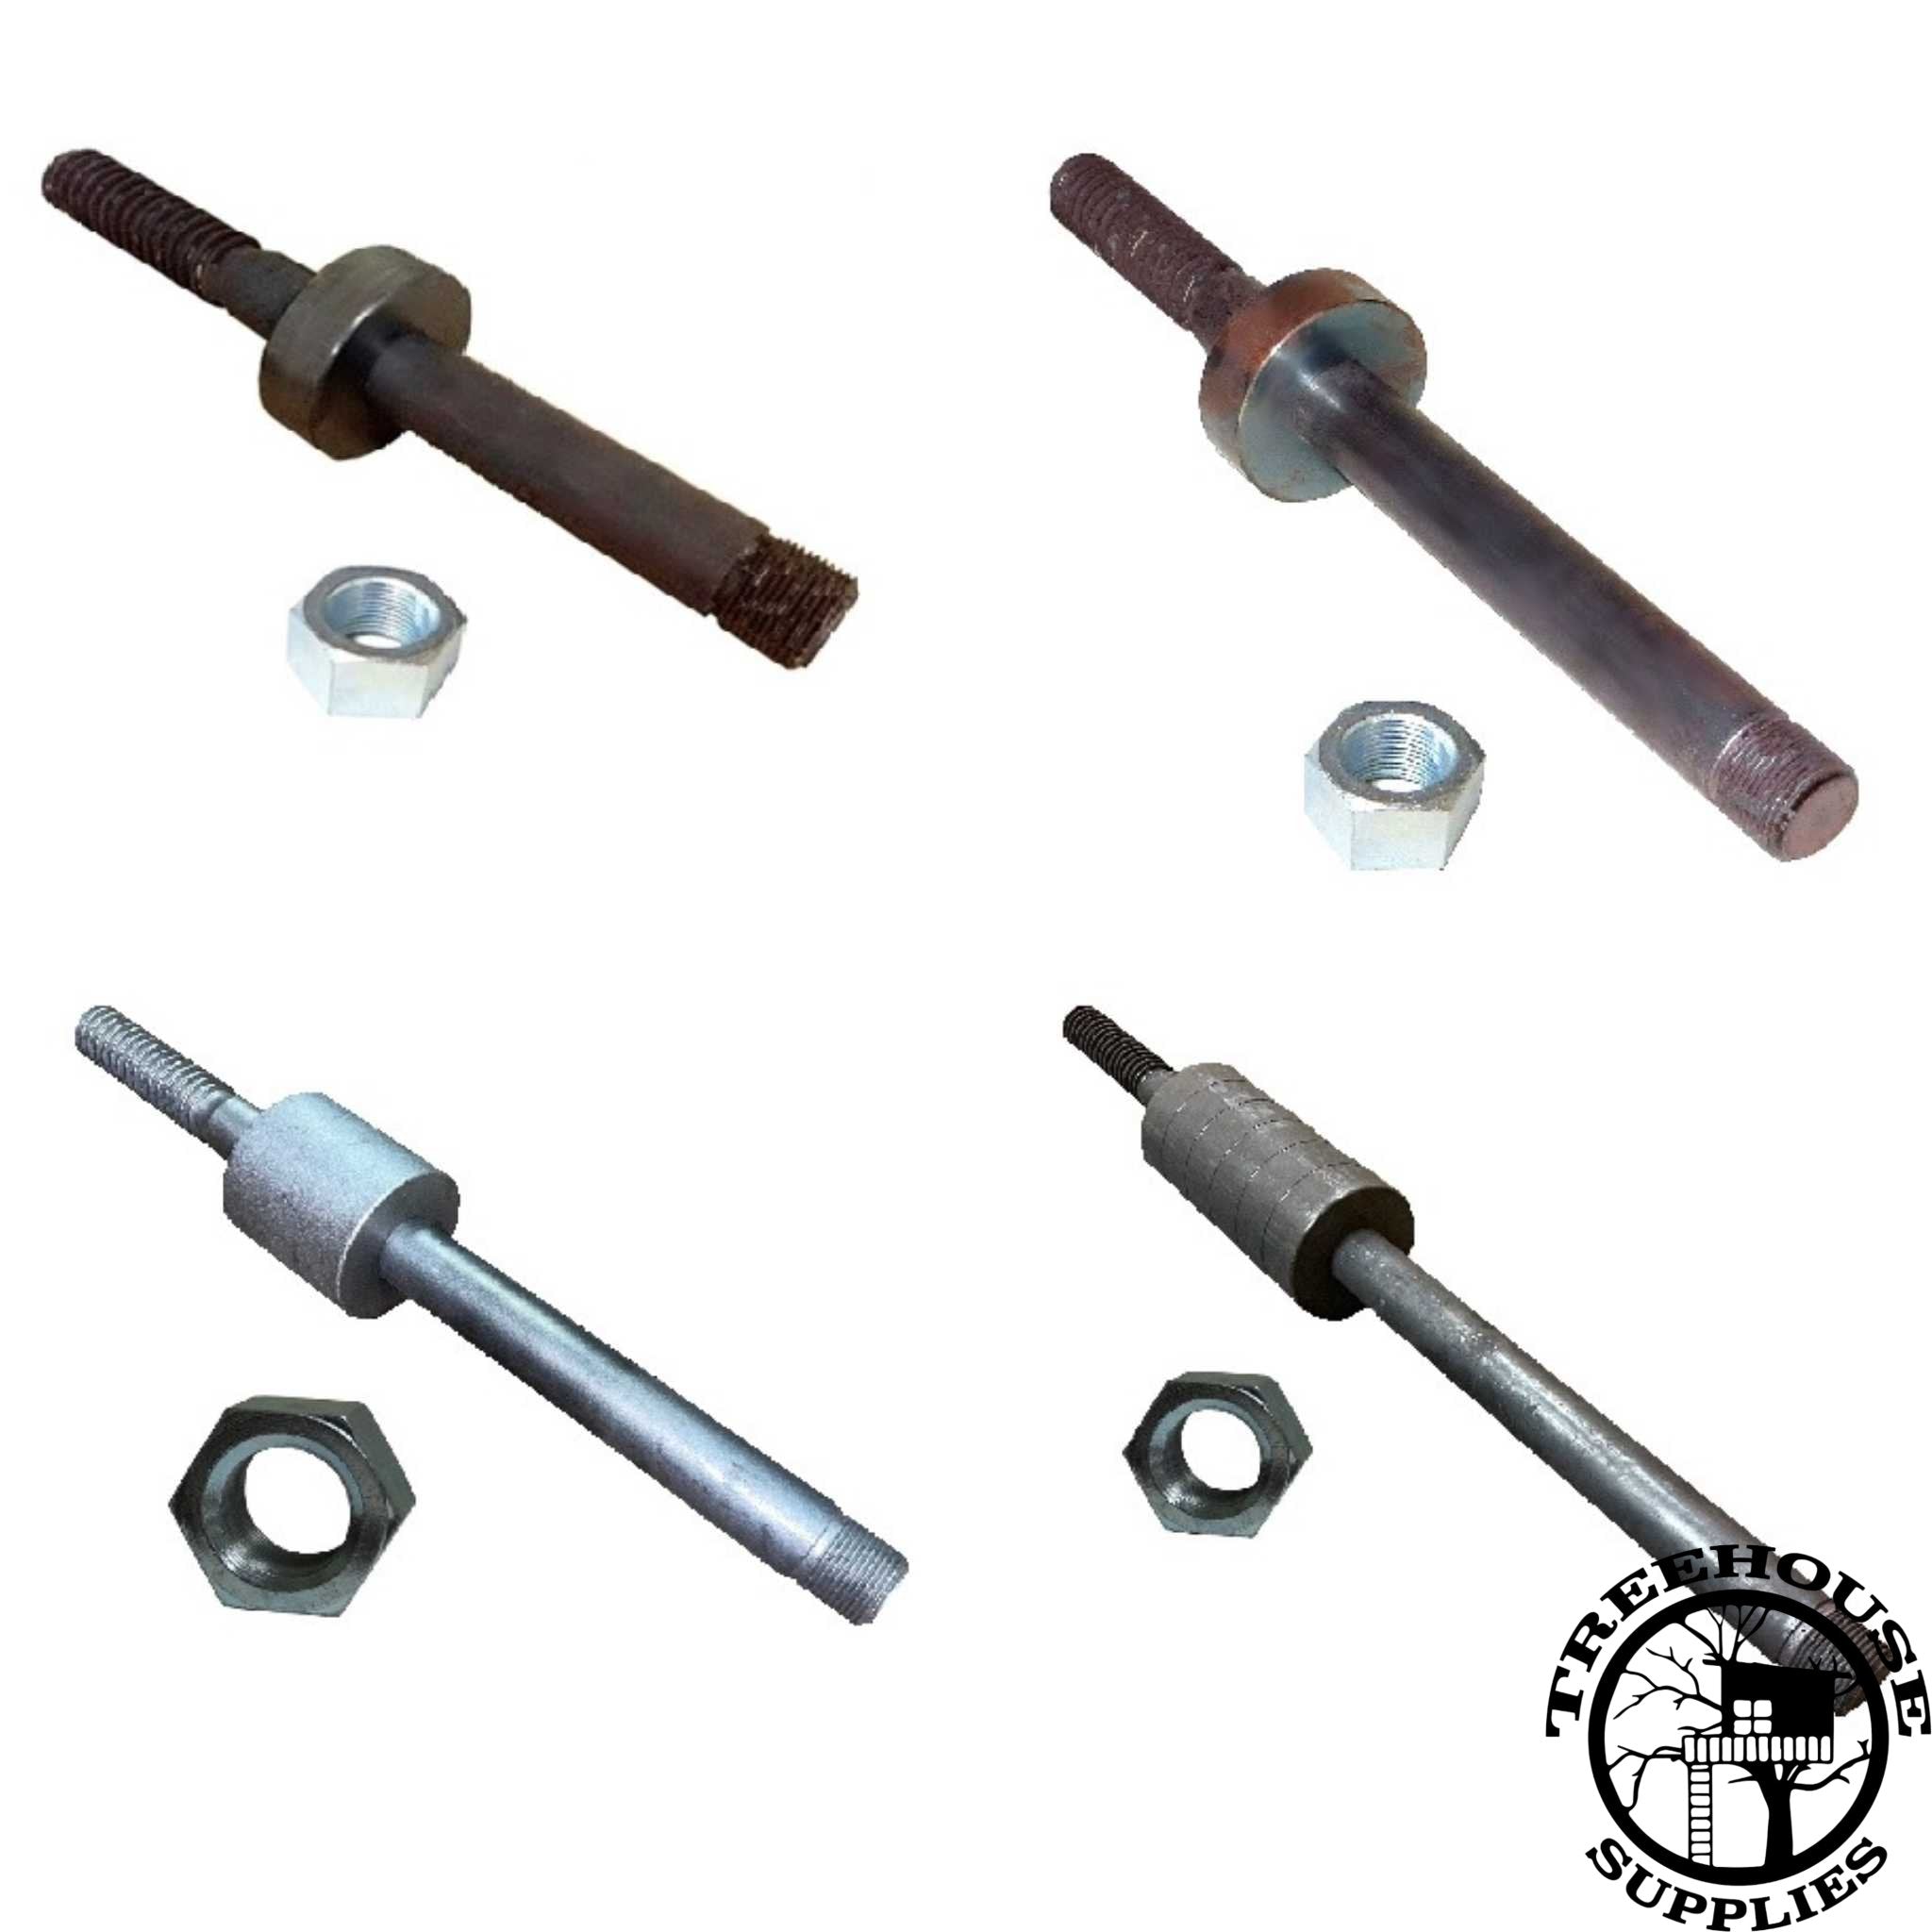 Four, non-powder coated treehouse attachment bolts (TAB)